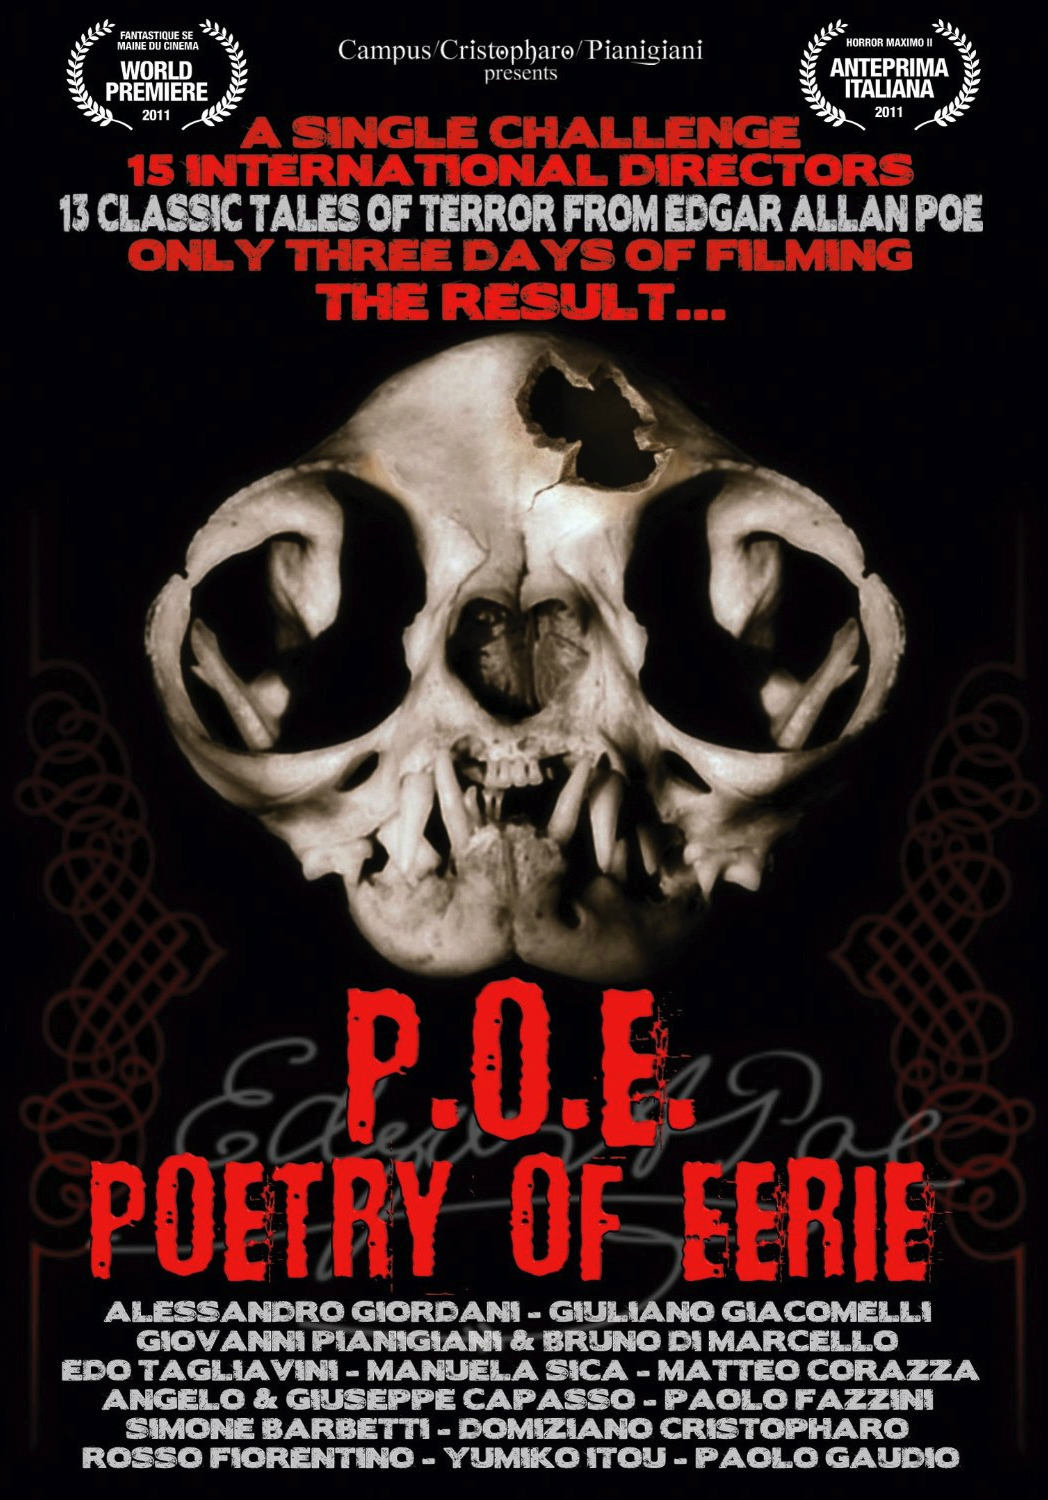 P.O.E. – Poetry of Eerie